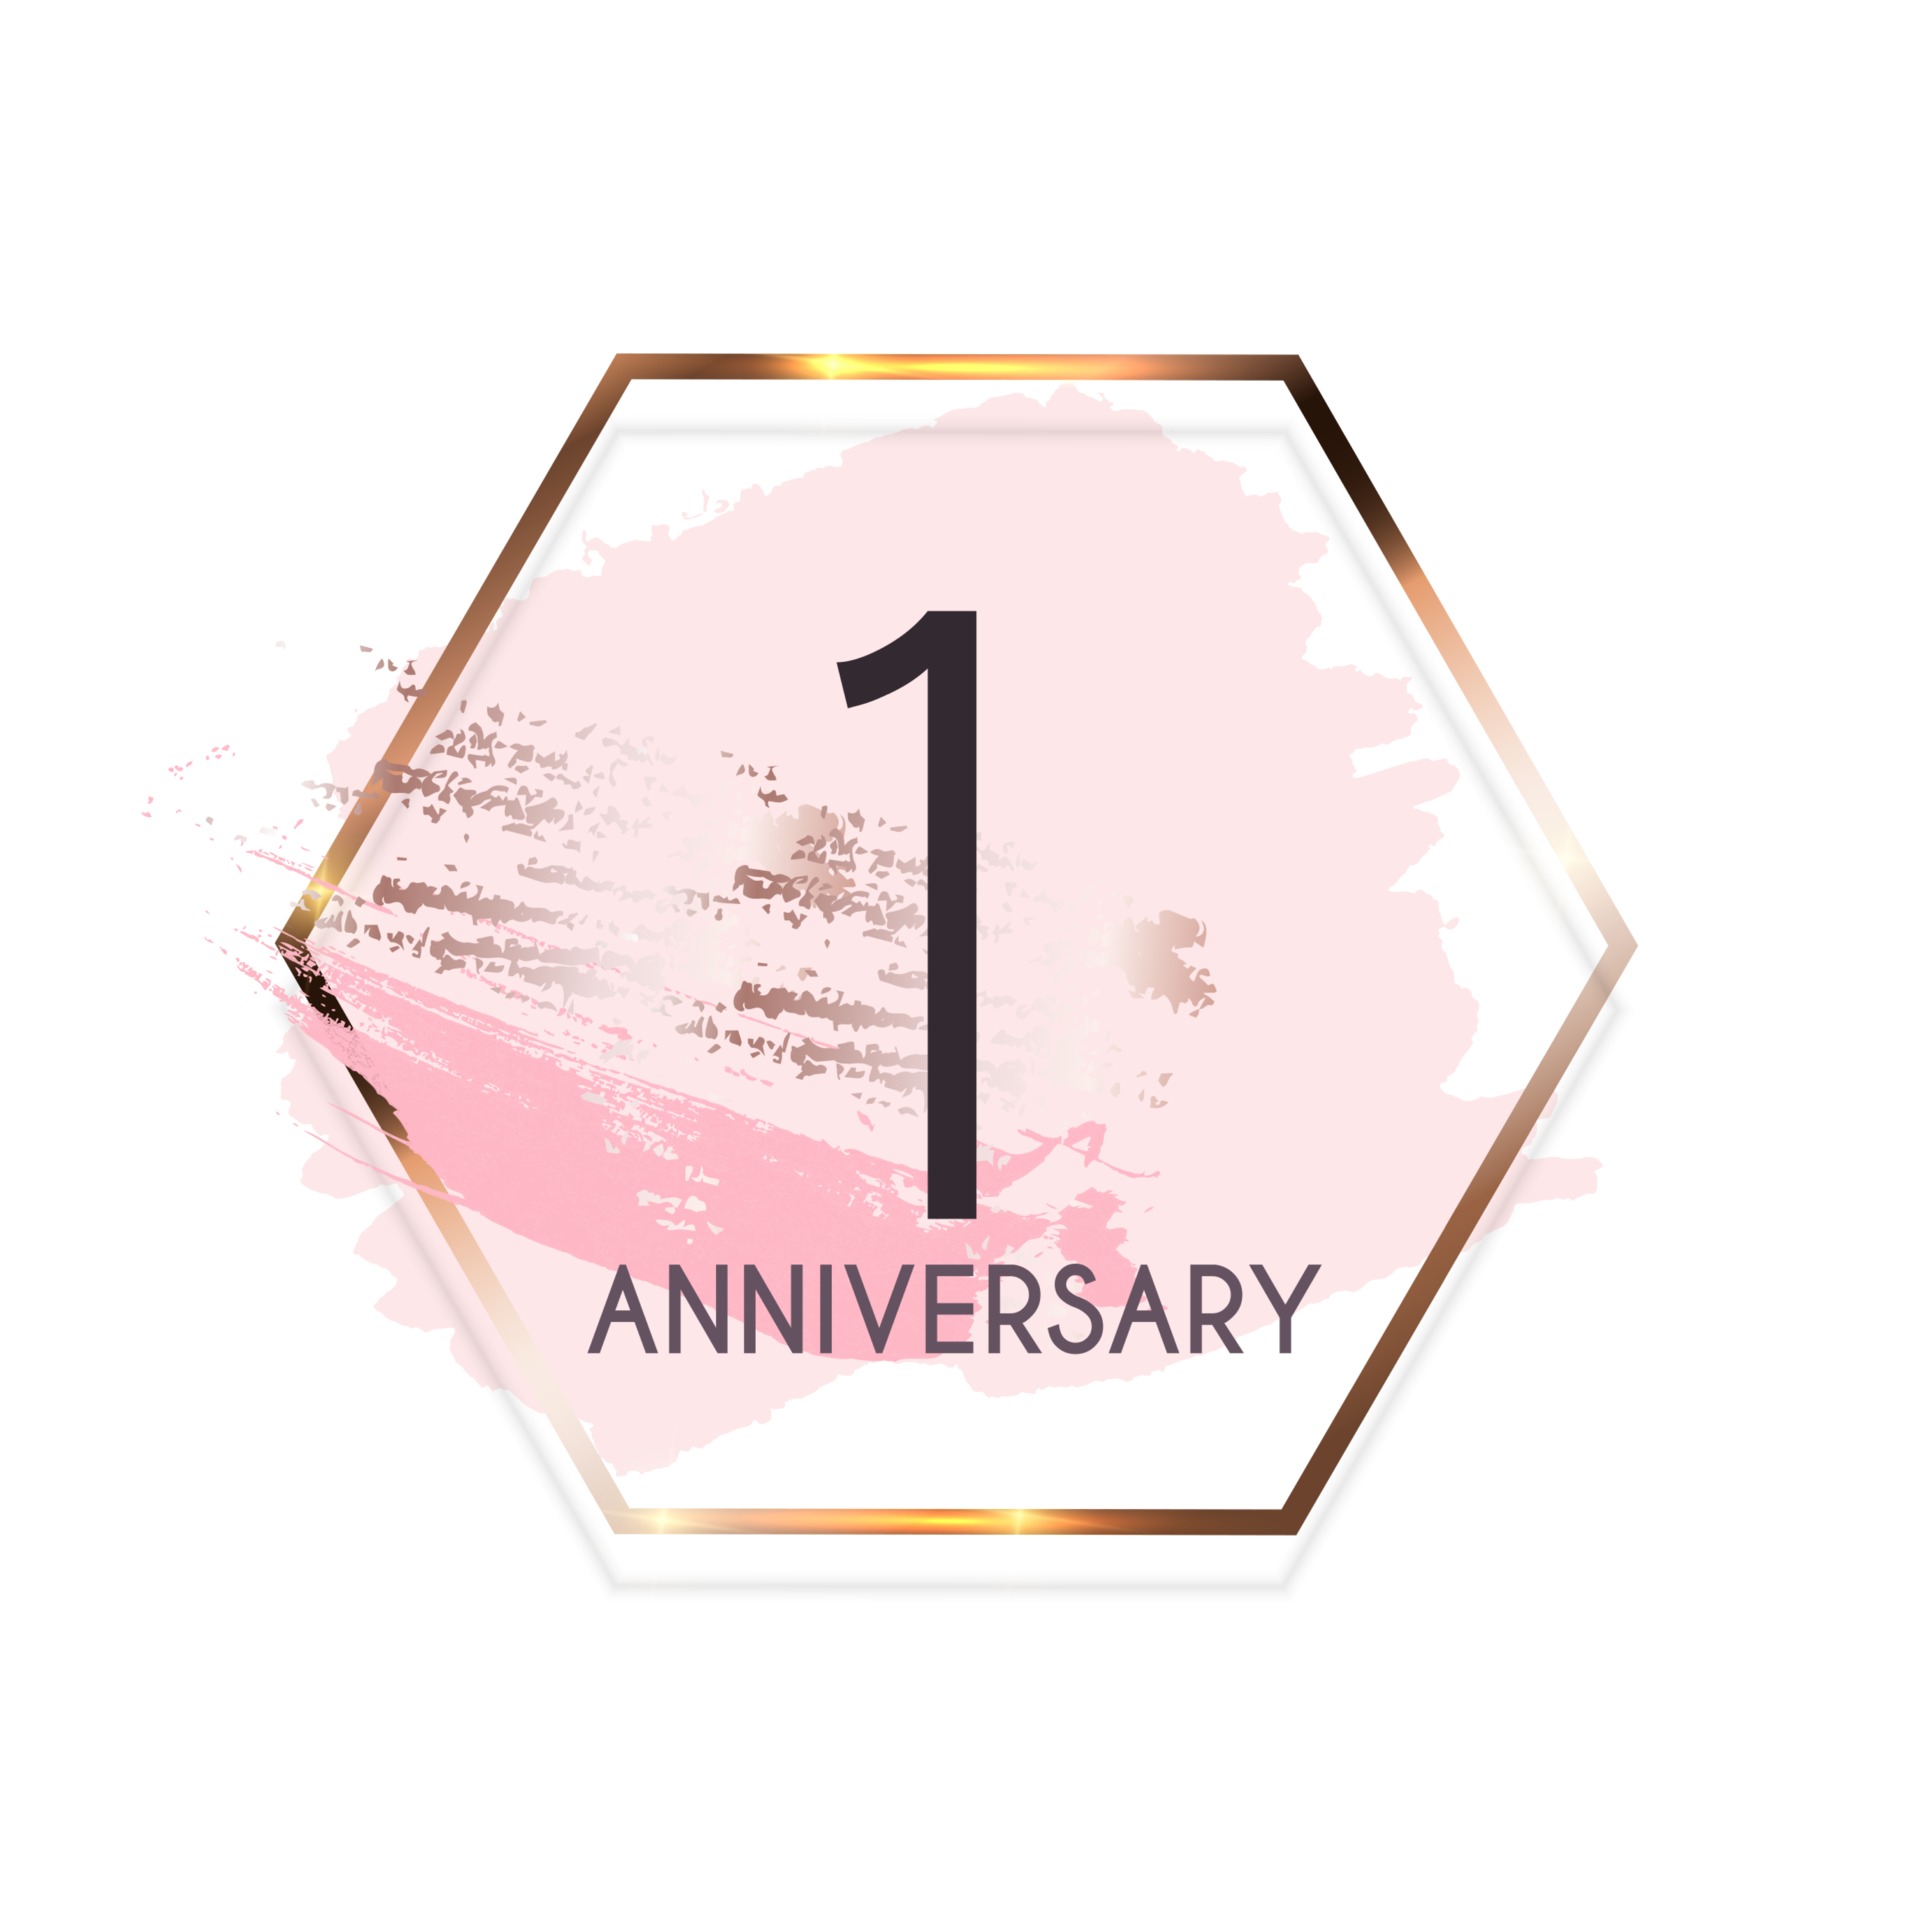 Celebrating 1 Anniversary emblem template design with gold numbers poster  background. Vector Illustration 2731960 Vector Art at Vecteezy